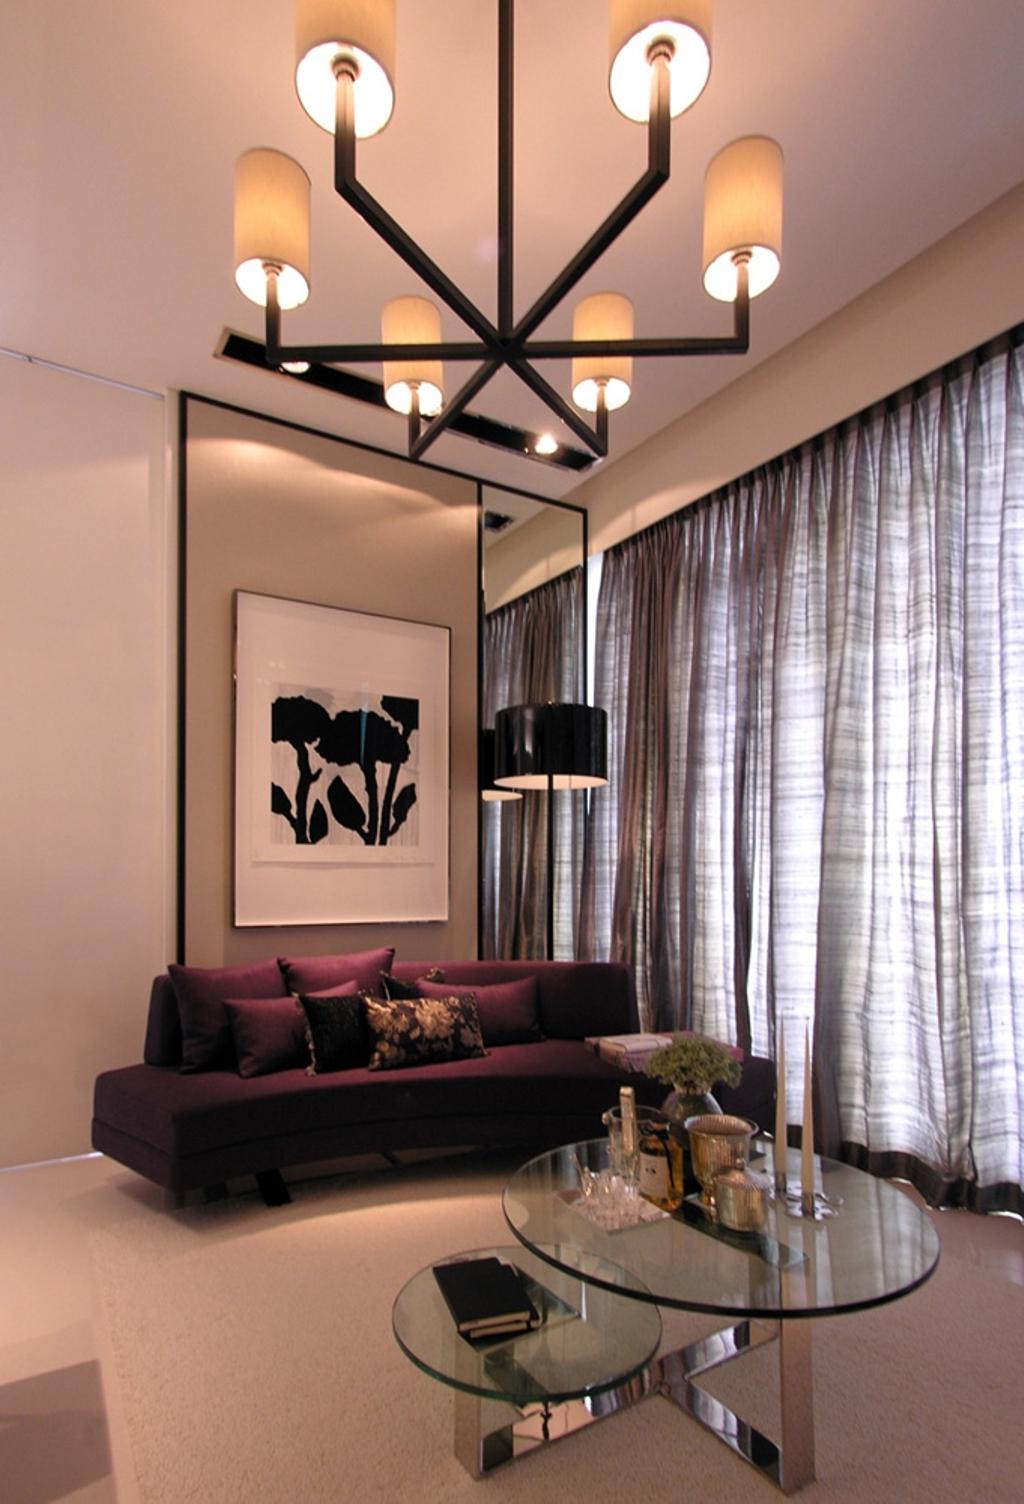 Scotts Square Show-unit 2, Commercial, Architect, Wallflower Architecture + Design, Modern, Living Room, Painting, Curtains, Wall Art, Floor Lamp, Glass Table Top, Brown Coffee Table, Hanging Light, Quirky Light, Couch, Furniture